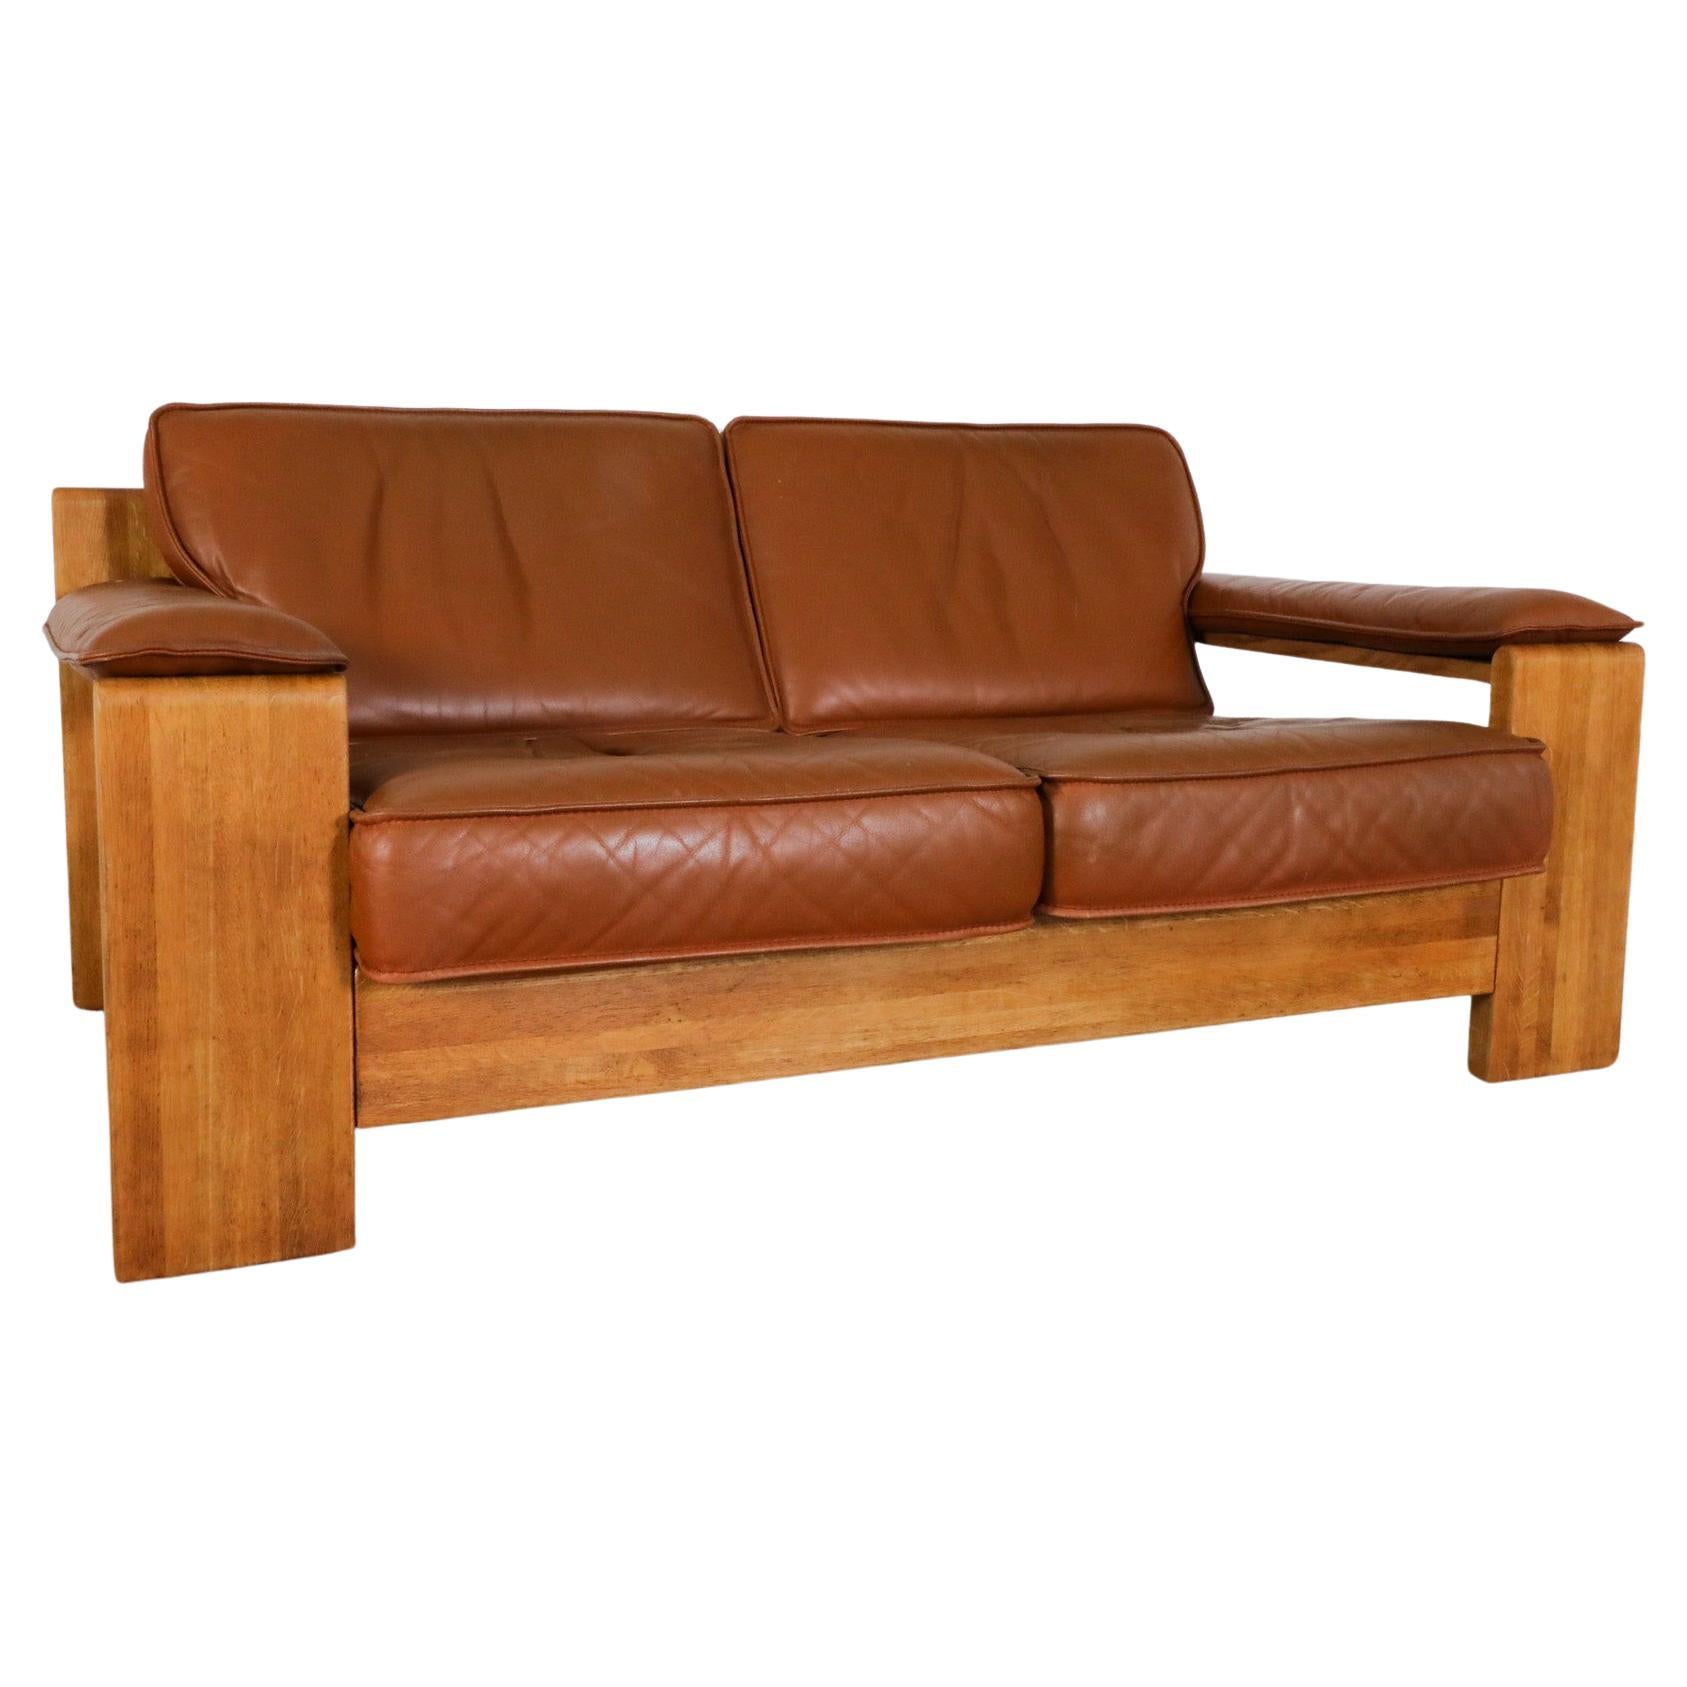 Mid-Century Leolux light oak loveseat with removable headrests. Beautiful natural Cognac leather cushions with light patina and 'Leolux' printed canvas support sling. The removable leather headrests seamlessly slot into the sling support for